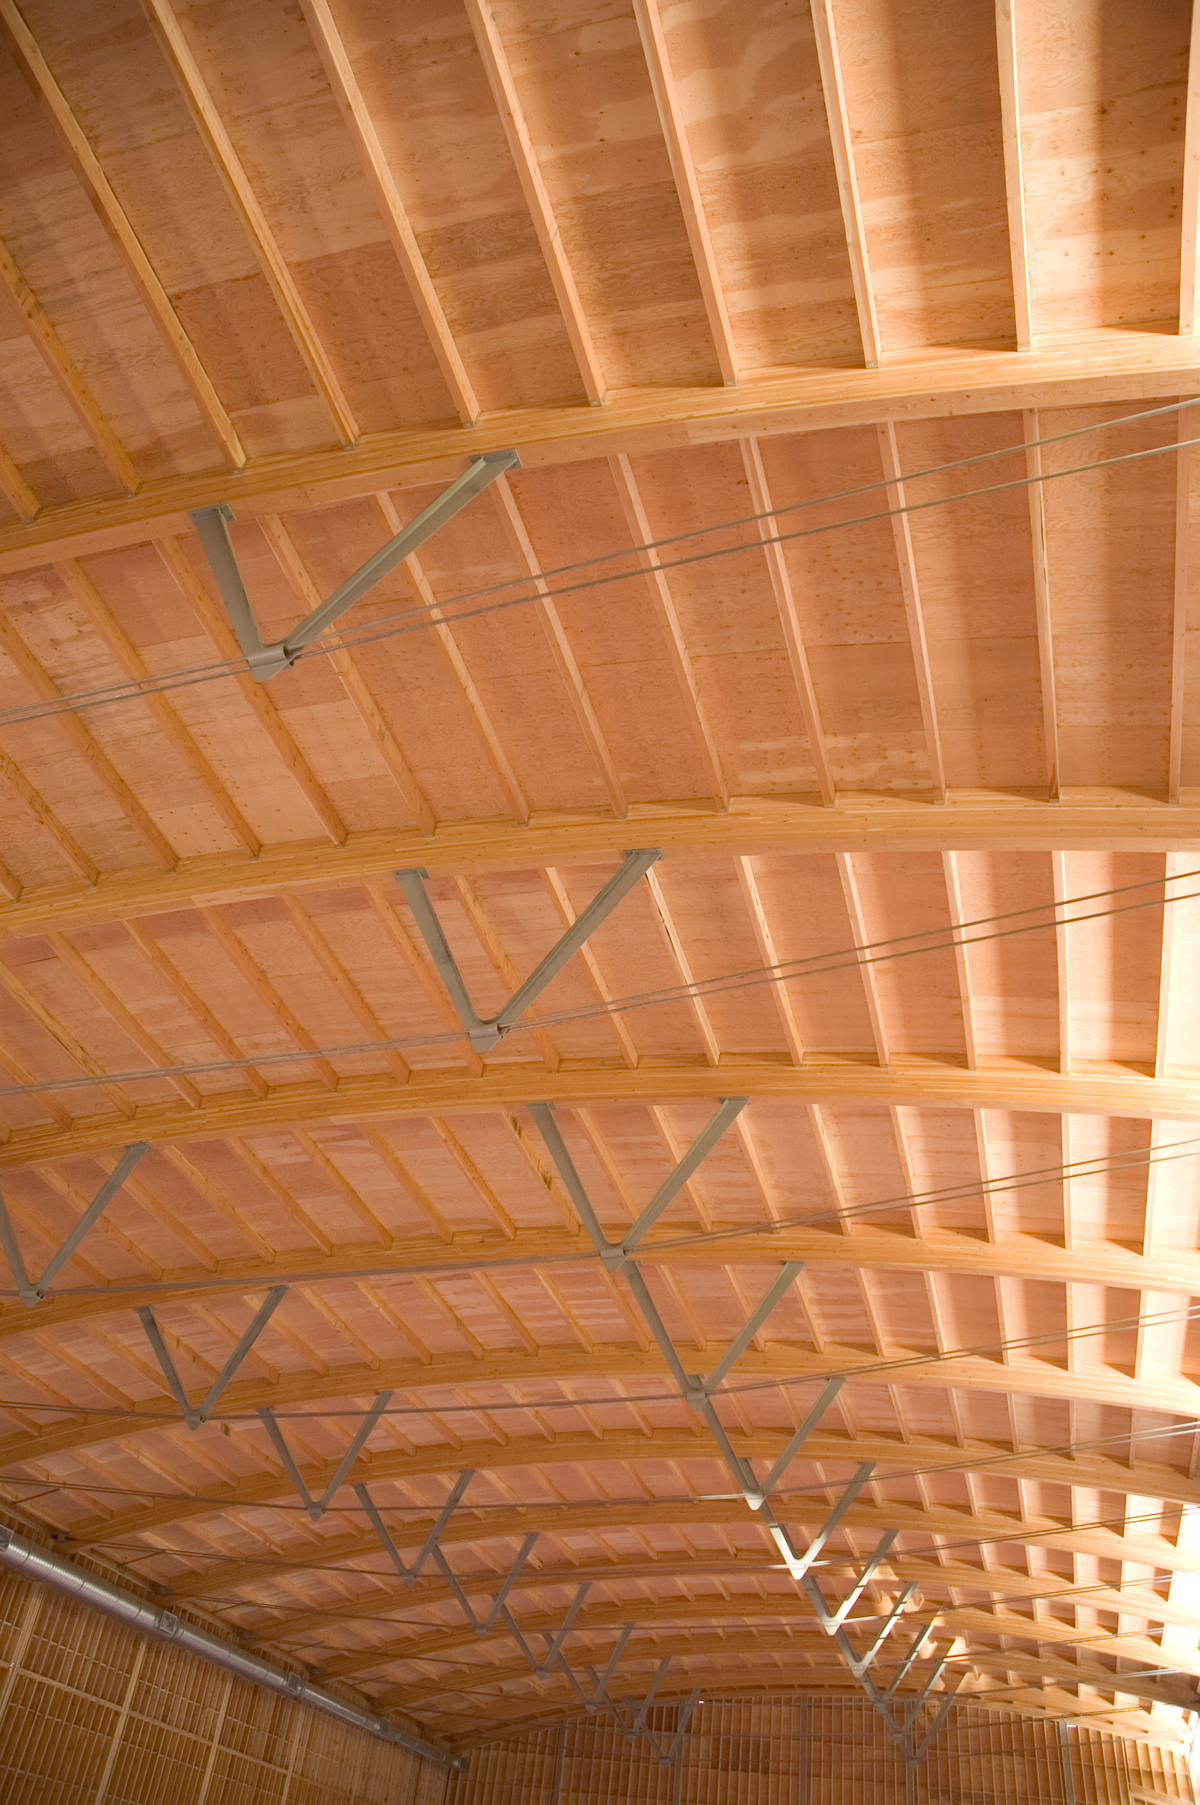 Close up daytime view inside Armstrong-Spallumcheen Arena showing arched glue-laminated (Glulam) beams, tension cables, and steel cable guides